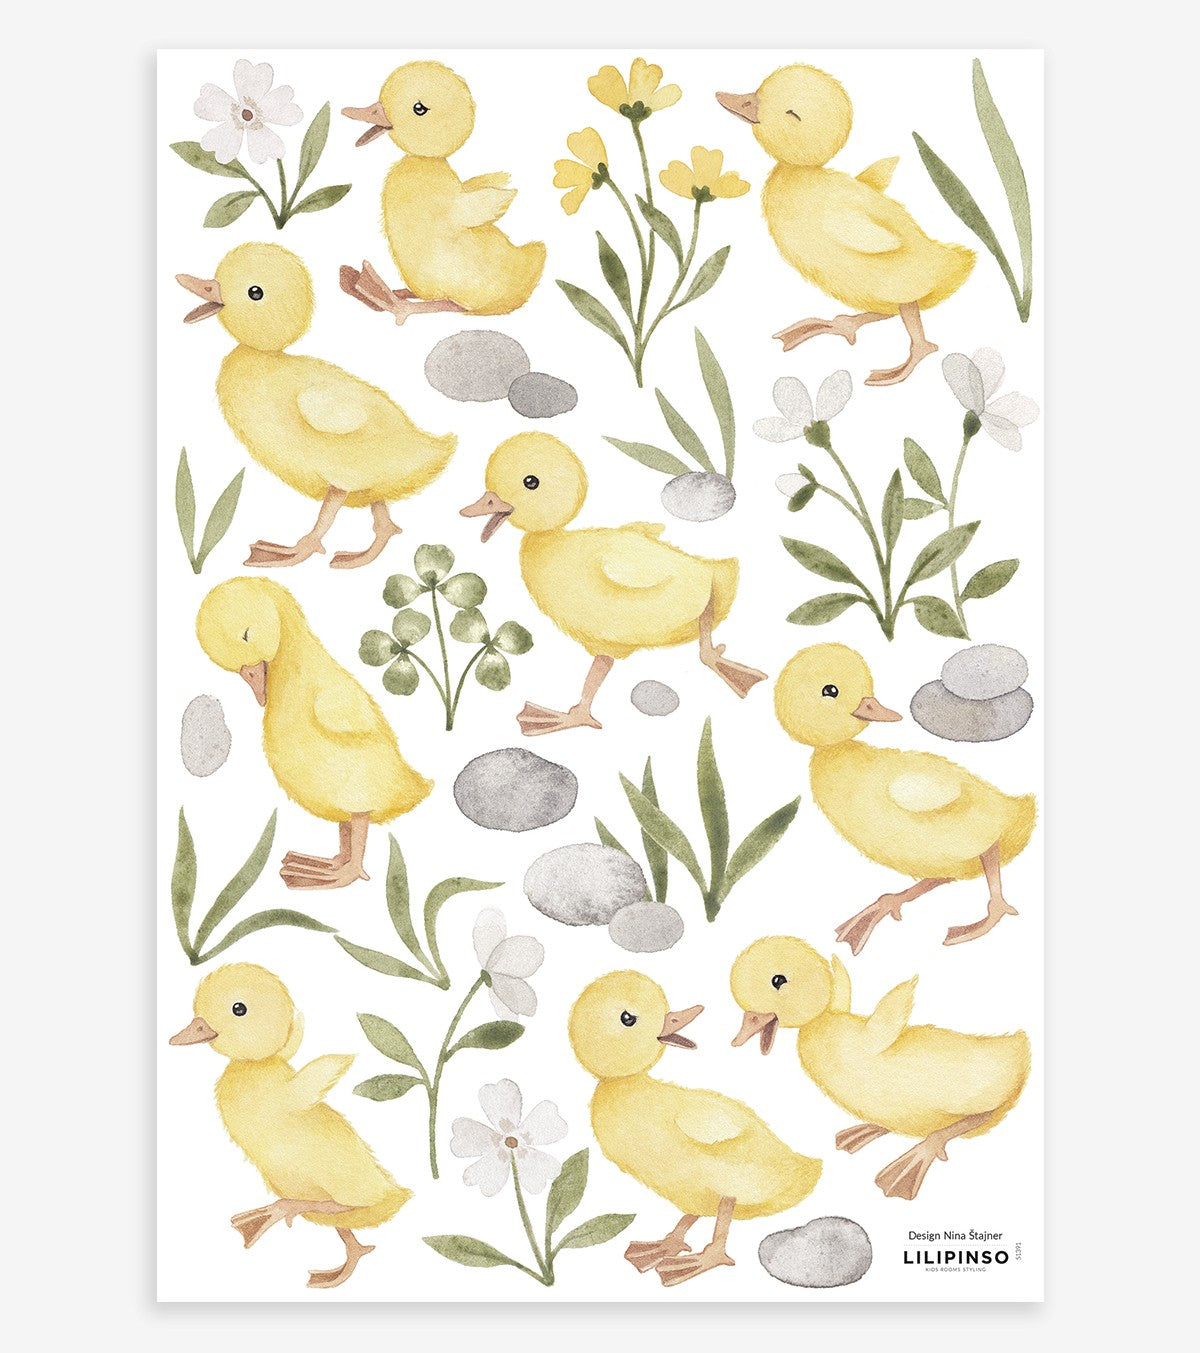 LUCKY DUCKY - Stickers muraux - 9 petits canetons